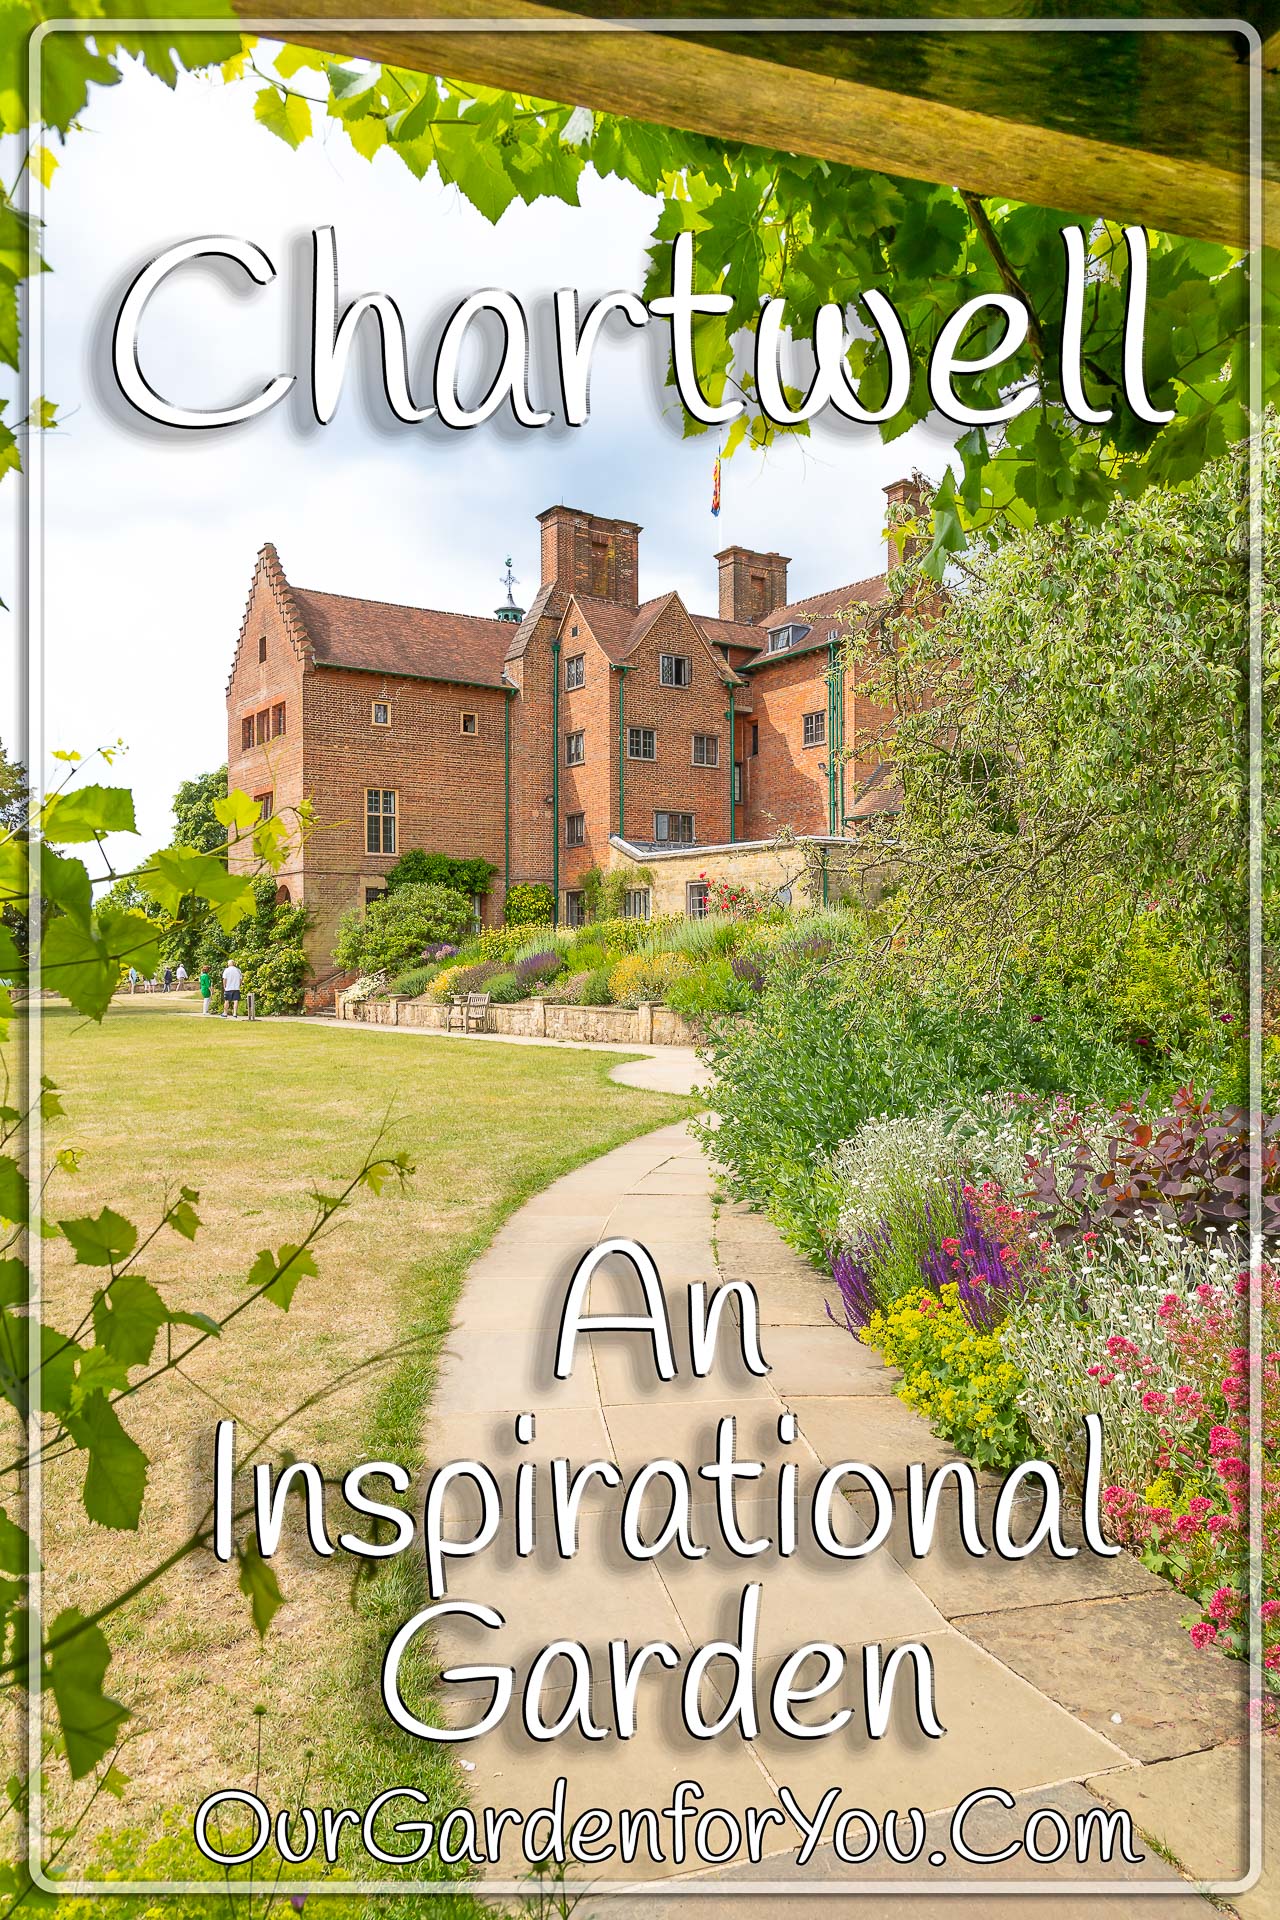 The pin image of our post - 'Chartwell, an inspirational garden'